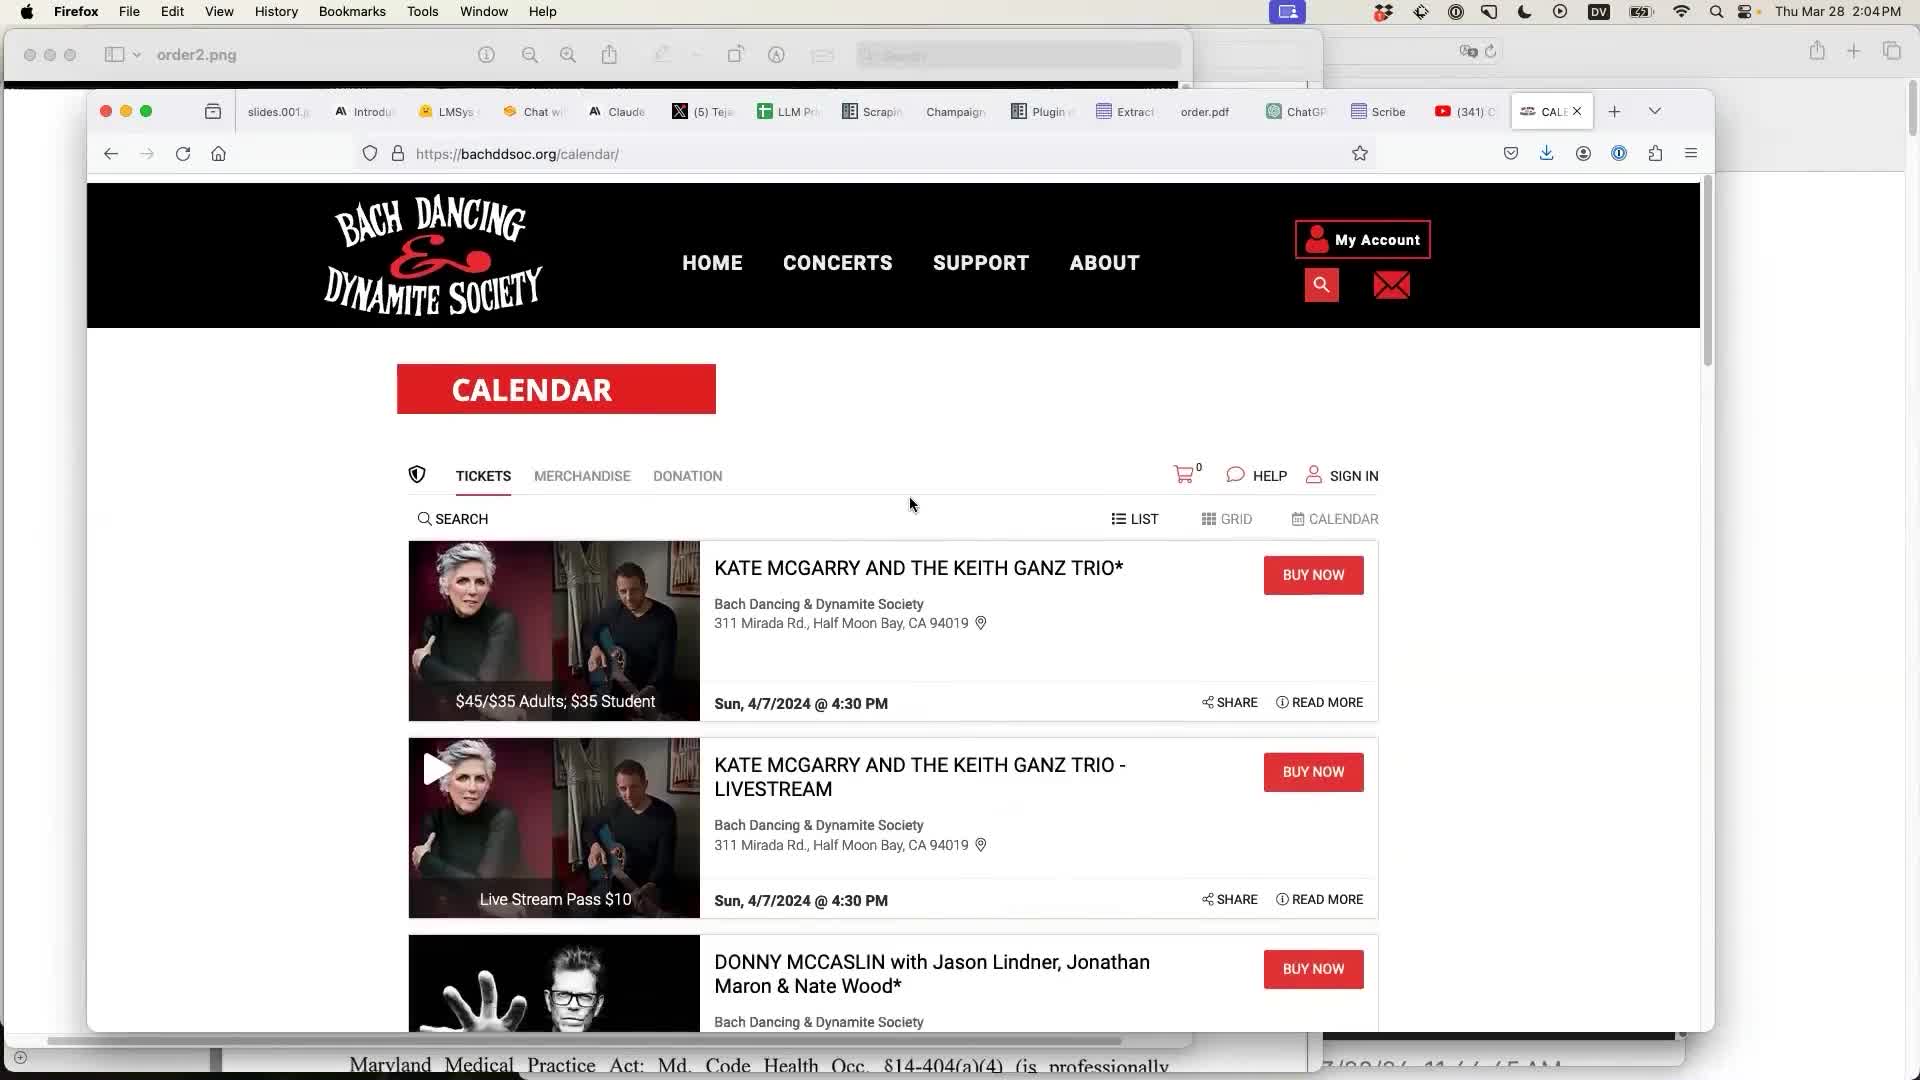 The events calendar page on their website